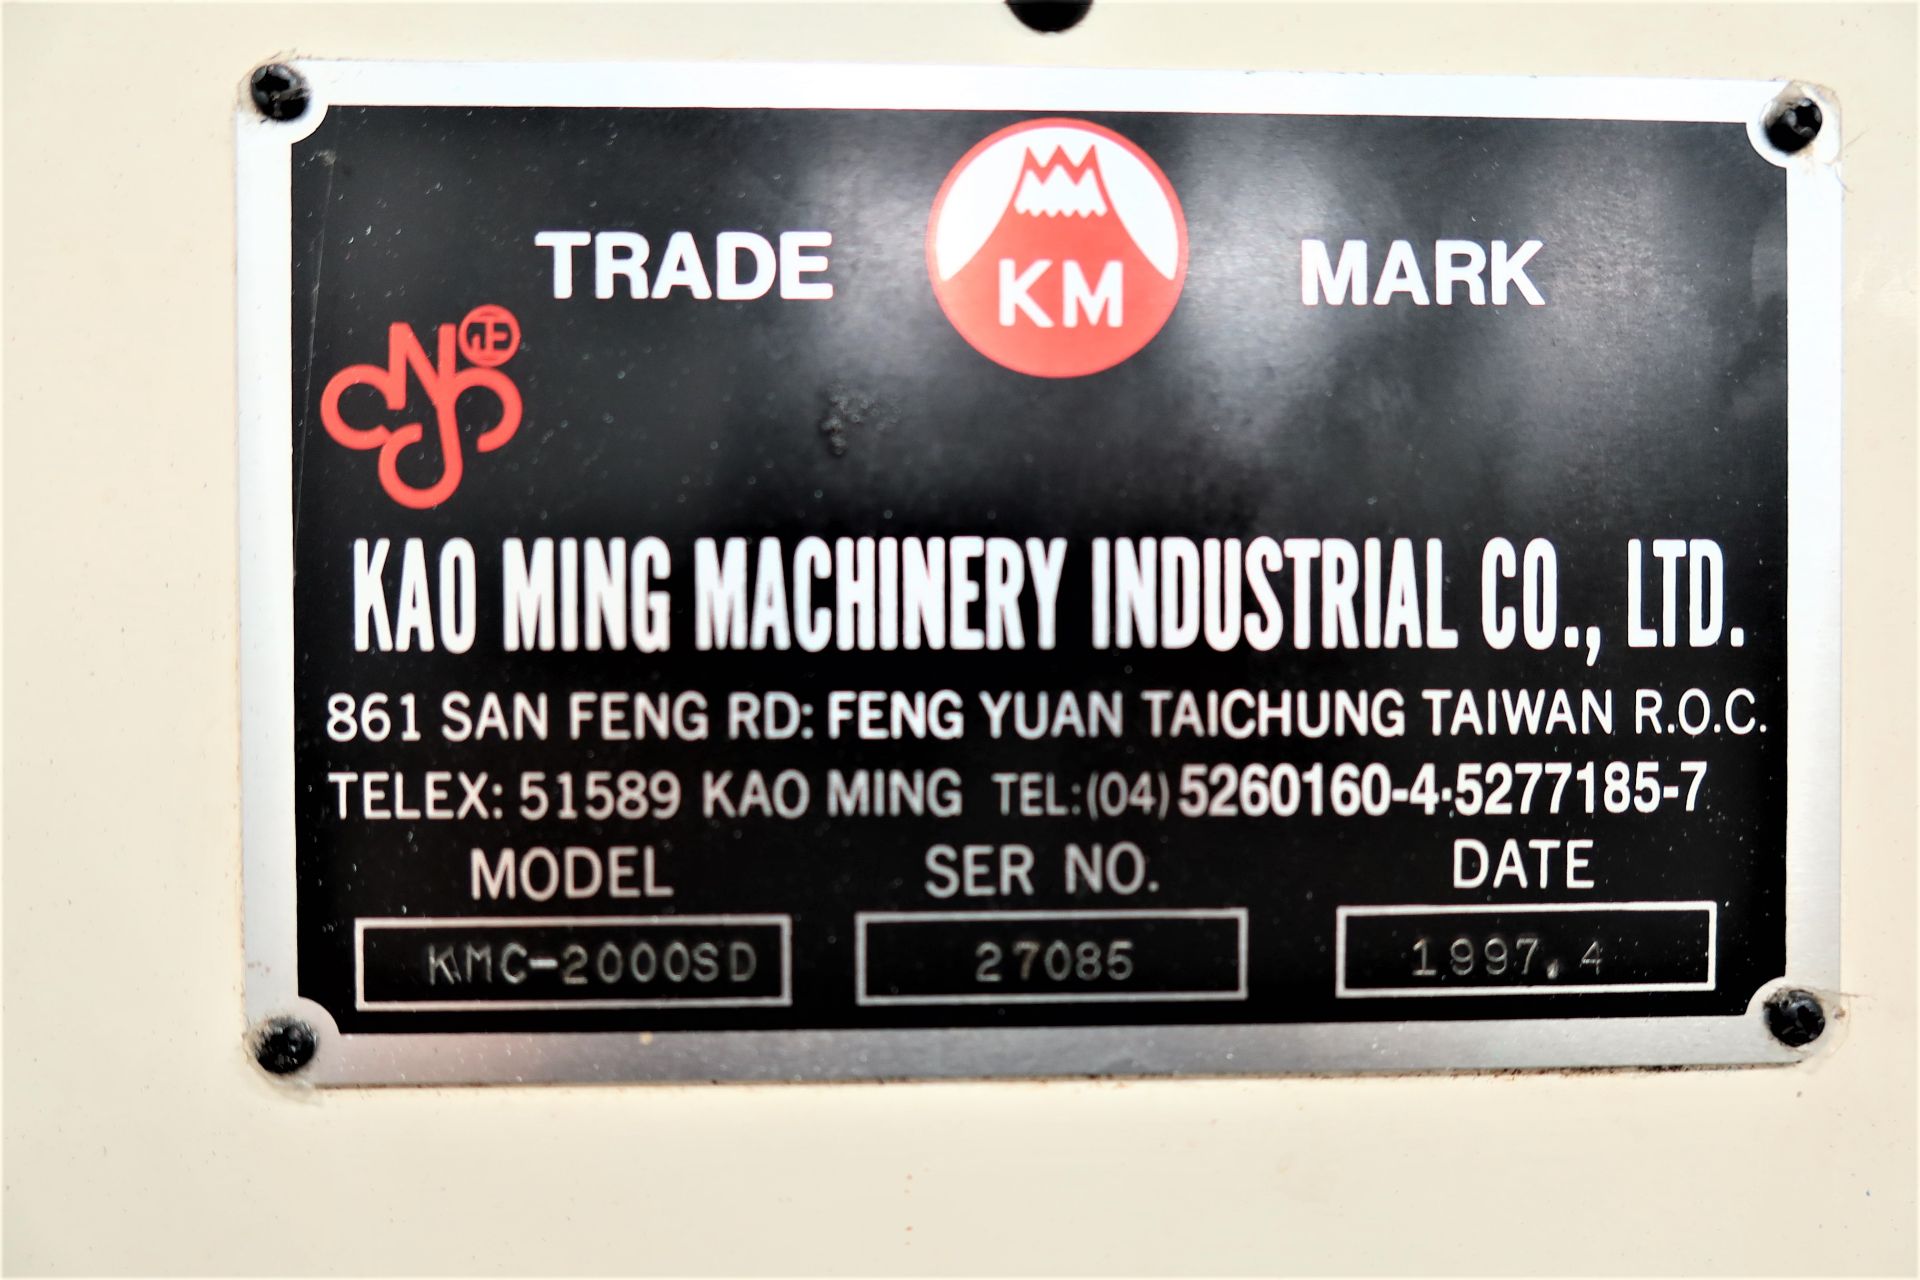 1997 Kao-Ming KMC-2000-SD BRIDGE TYPE VERTICAL MACHINING CENTER WITH Fanuc OM CNC - Image 6 of 7